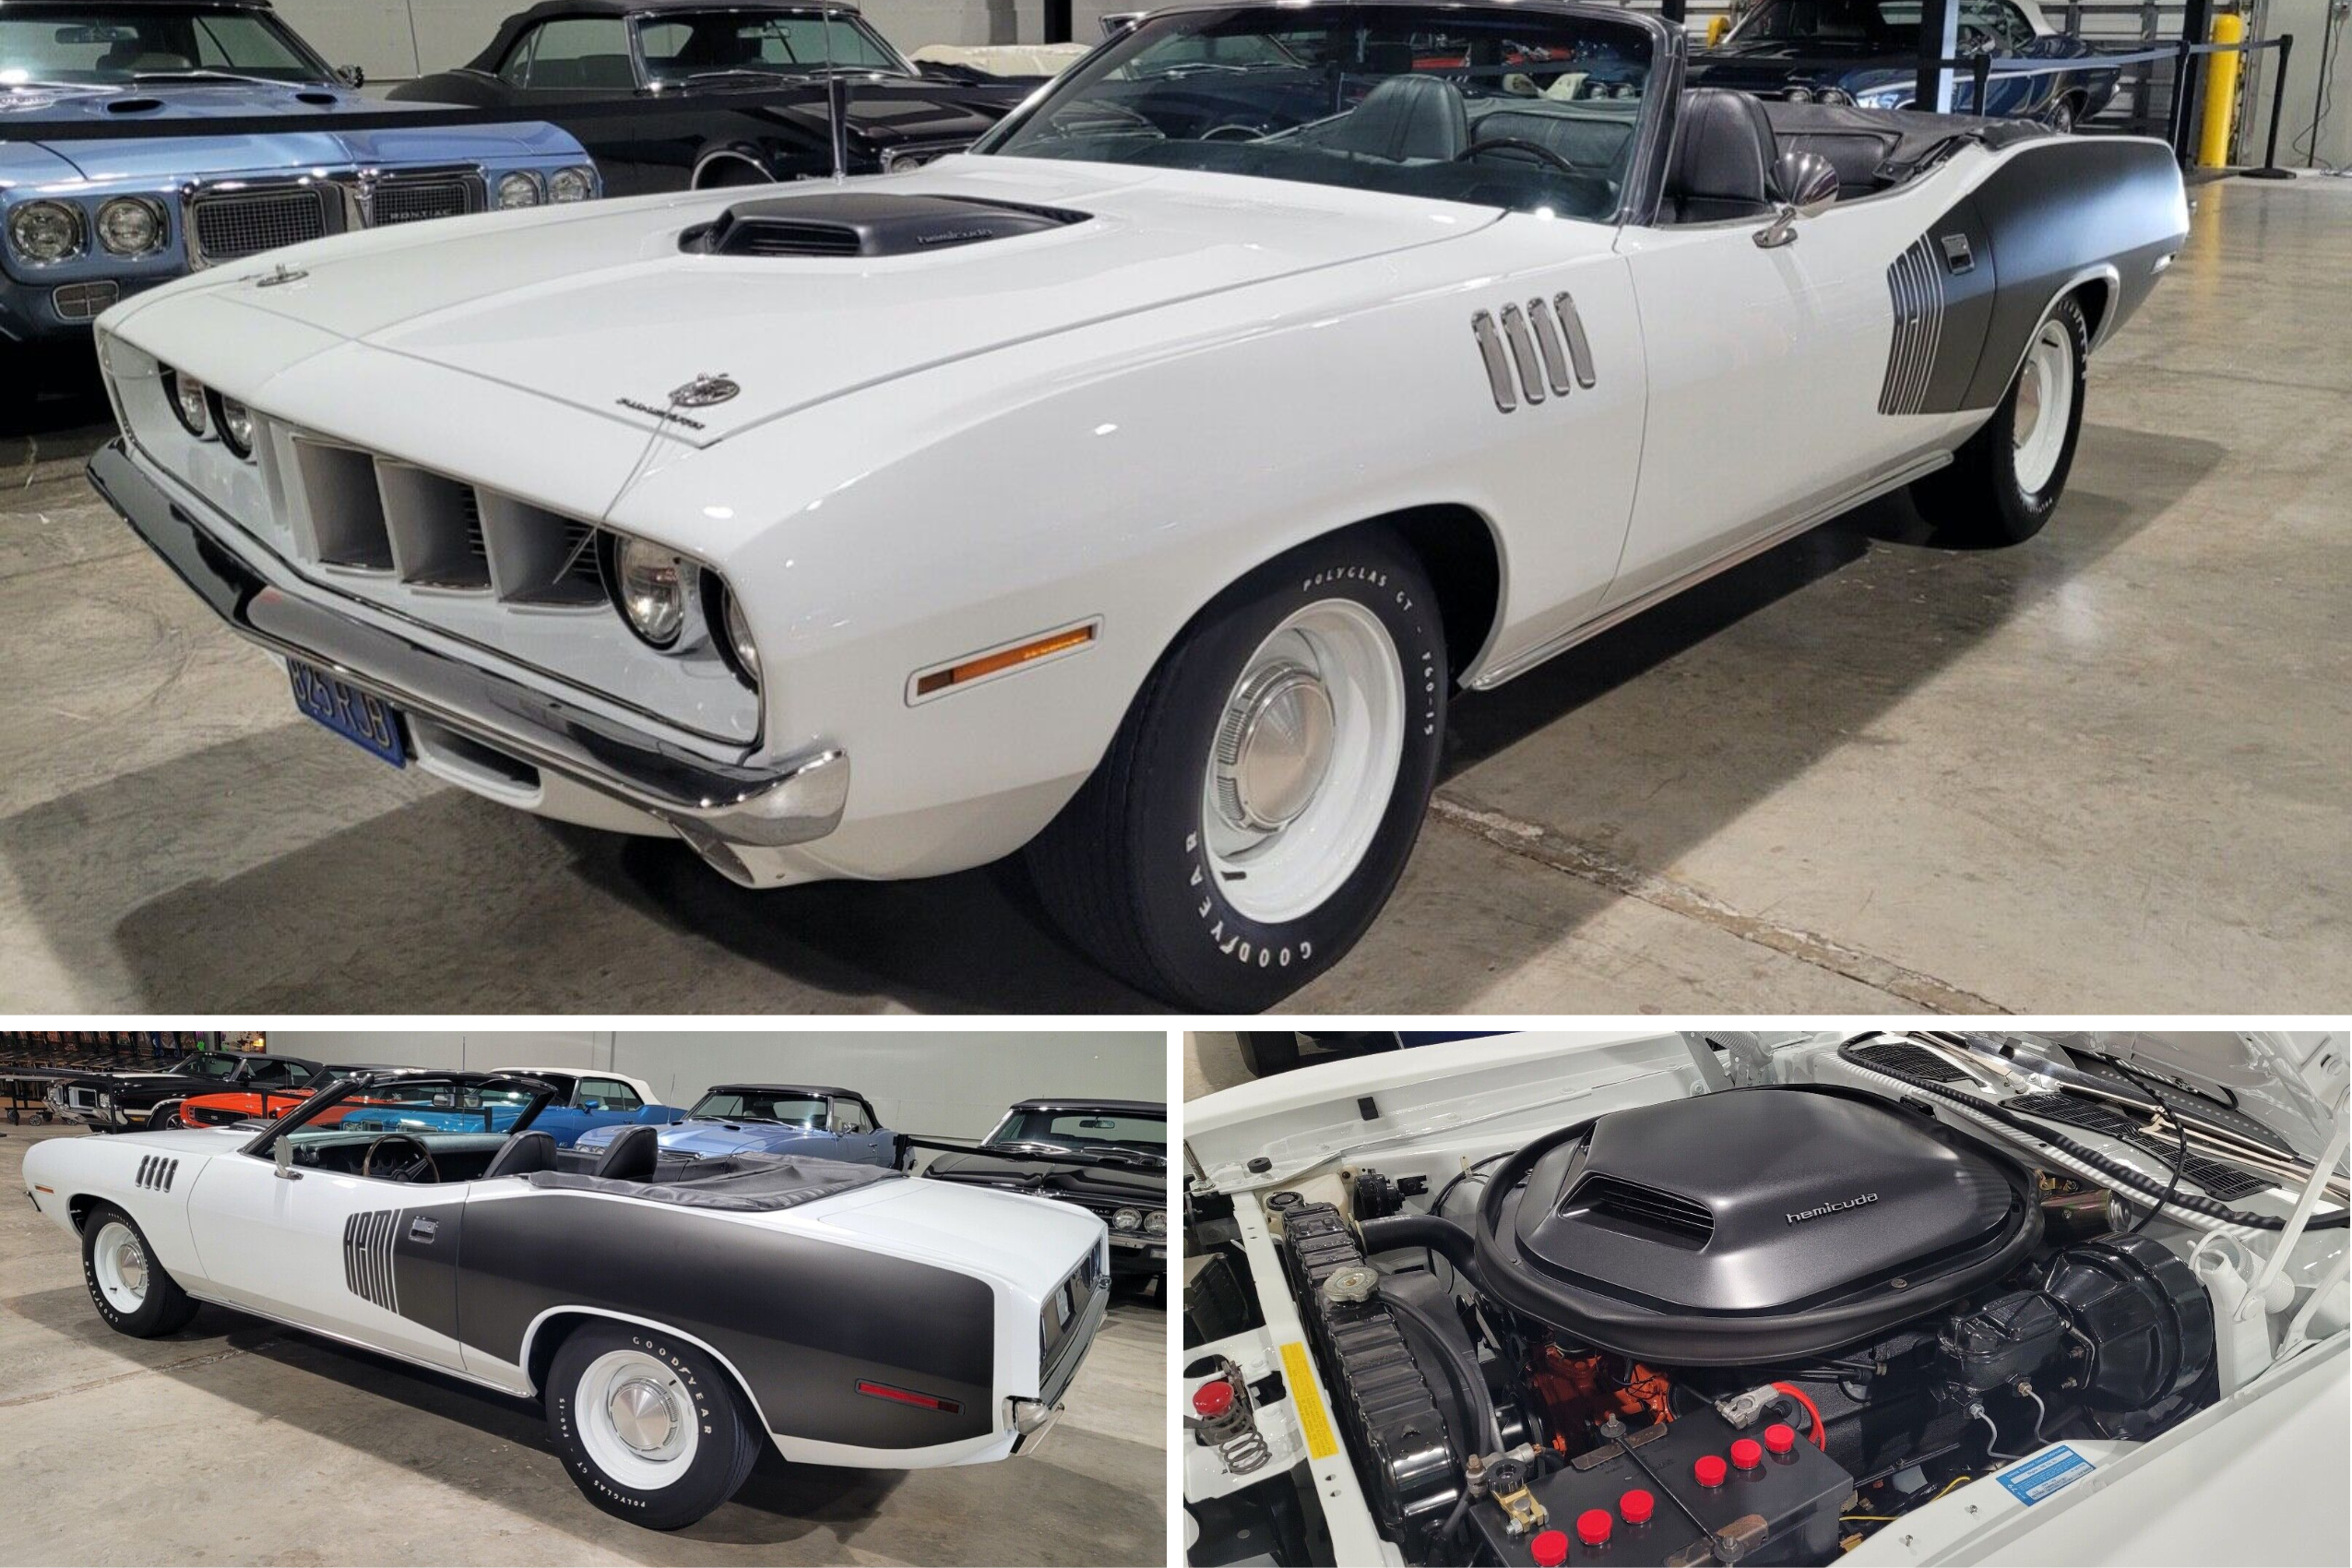 One-of-5 1971 Plymouth HEMI ‘Cuda Convertible Pops Up for Sale, Starts From .75 Million